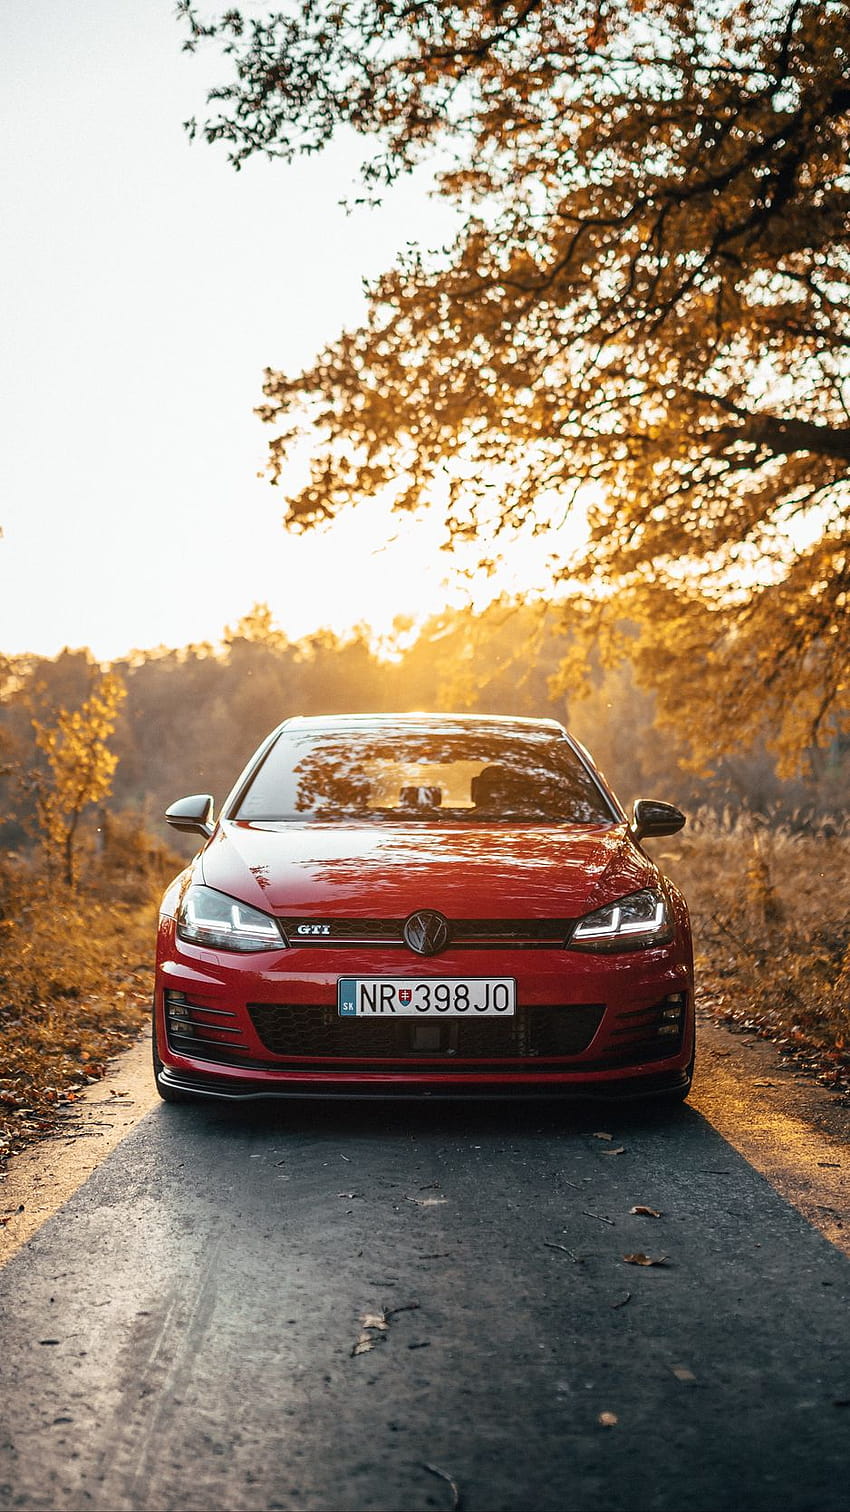 938x1668 volkswagen golf gti, volkswagen, car, red, front view iphone 8/7/6s/6 for parallax backgrounds, golf gti iphone HD phone wallpaper